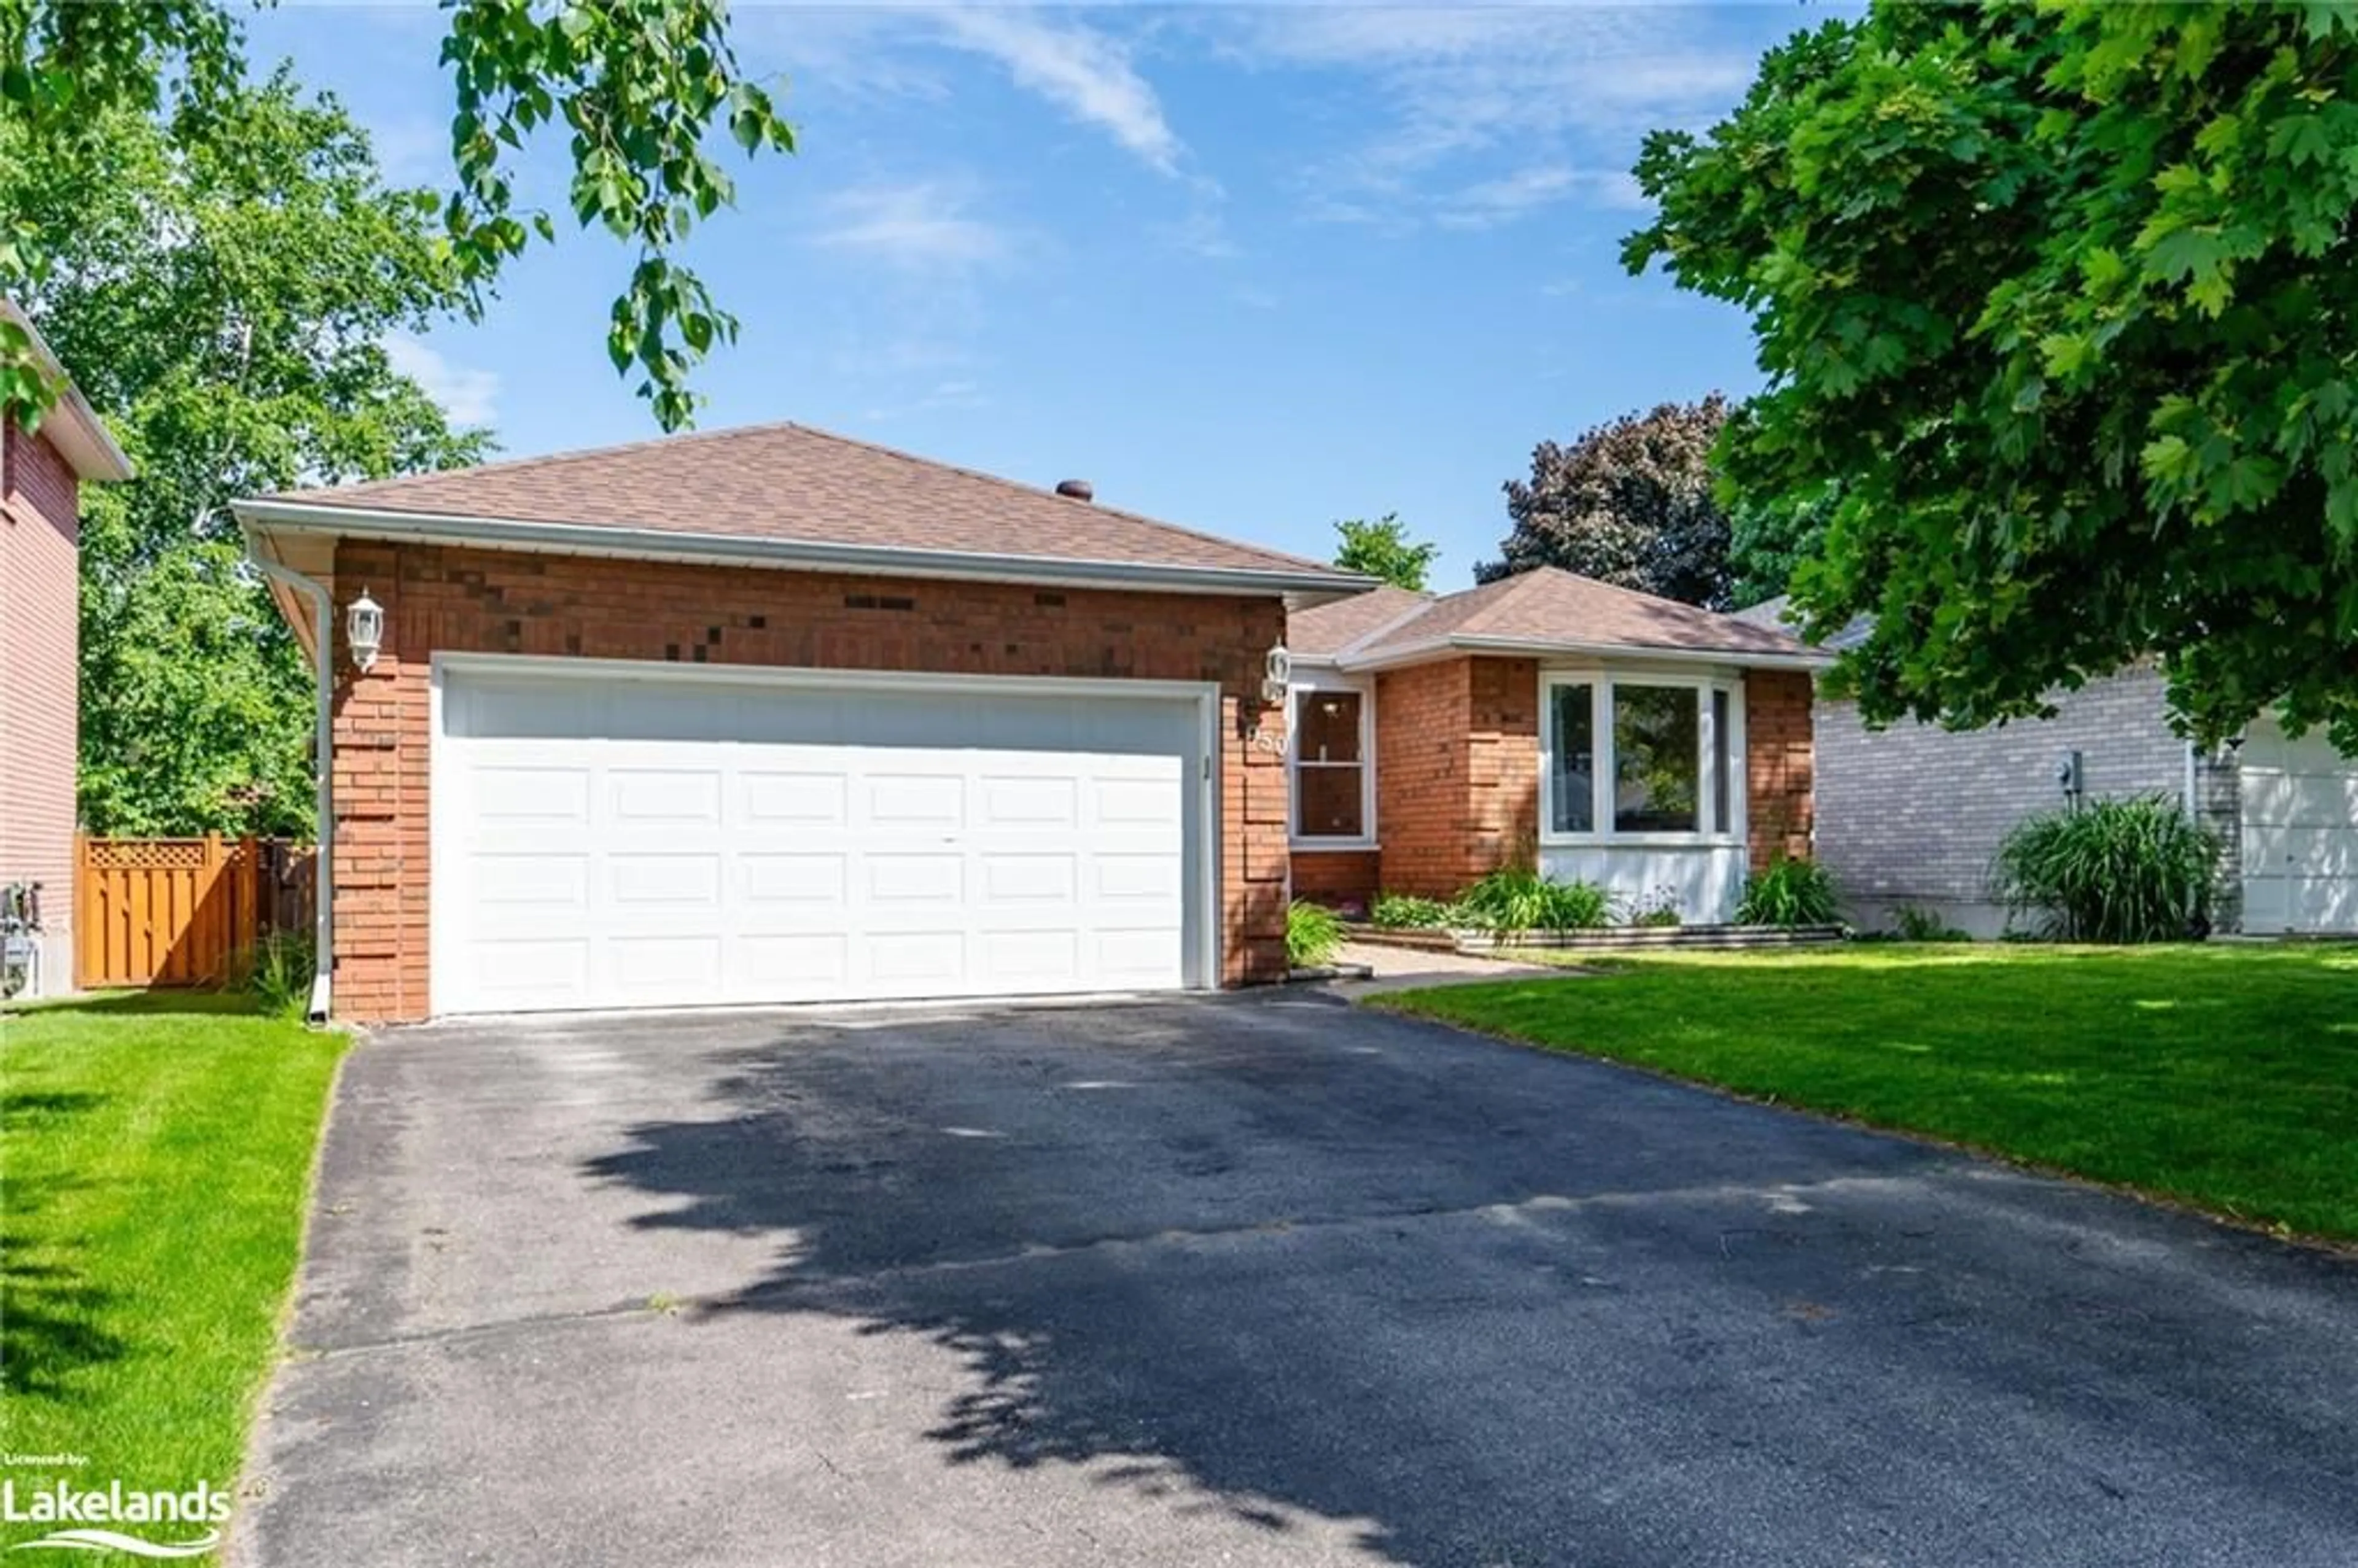 Frontside or backside of a home for 950 Dominion Ave, Midland Ontario L4R 1S8